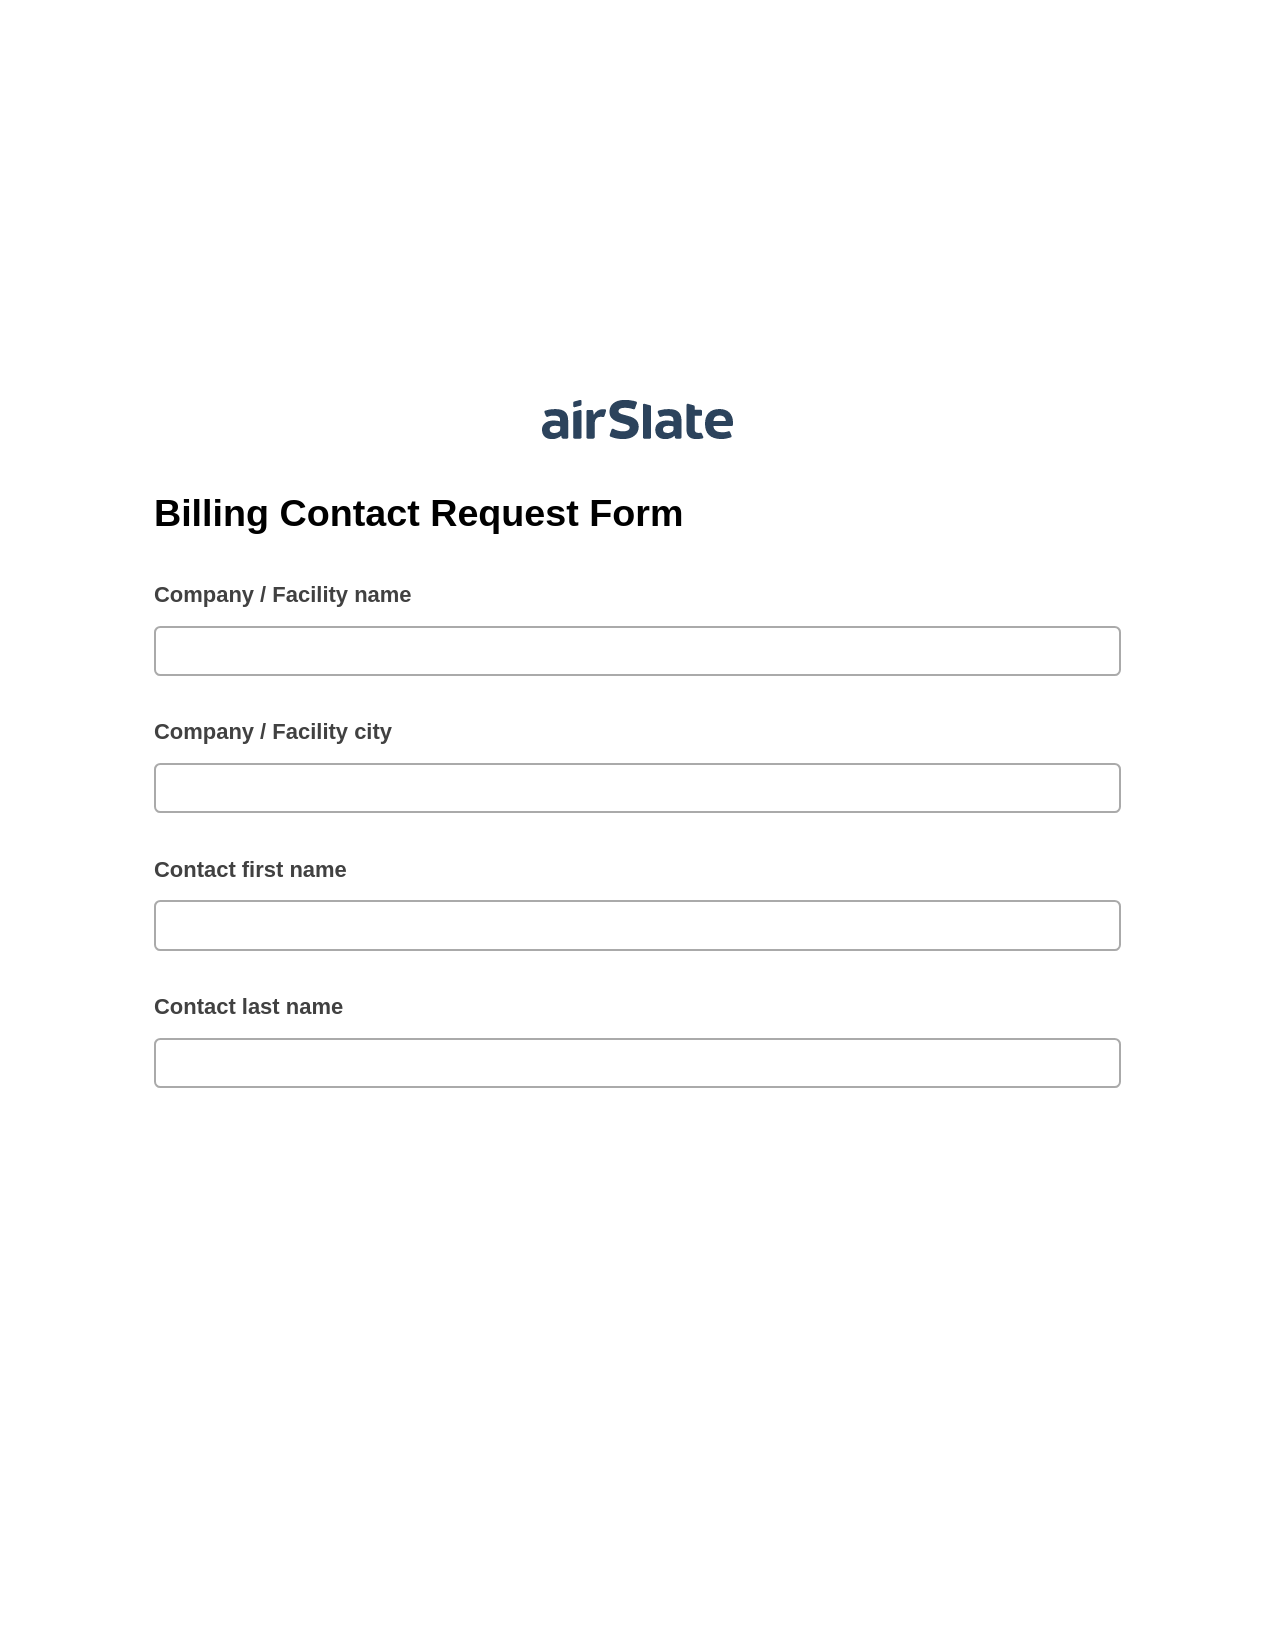 Multirole Billing Contact Request Form Pre-fill Slate from MS Dynamics 365 Records Bot, Audit Trail Bot, Export to Formstack Documents Bot